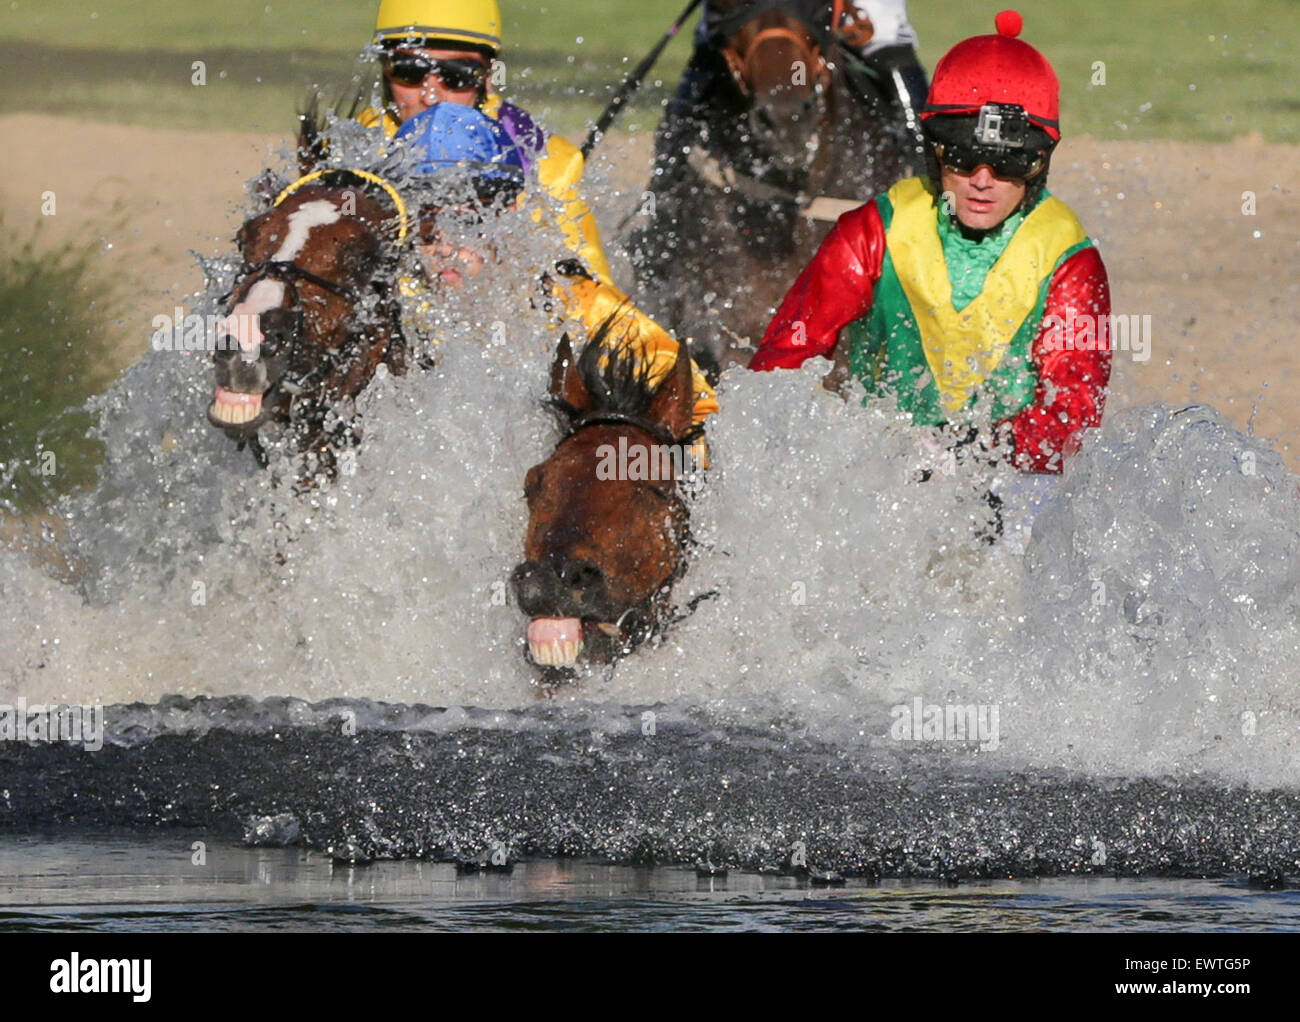 Hamburg, Germany. 30th June, 2015. Equastrians Cevin Chan on Kazzio (l-r), Julian Marinov on Samurai and Lukas Sloup on Laendler chase their horses through a pond during the Alpine Motorenoel-Seejagdrennen equestrian galloping race at the horse race track in Hamburg, Germany, 30 June 2015. Photo: Axel Heimken/dpa/Alamy Live News Stock Photo